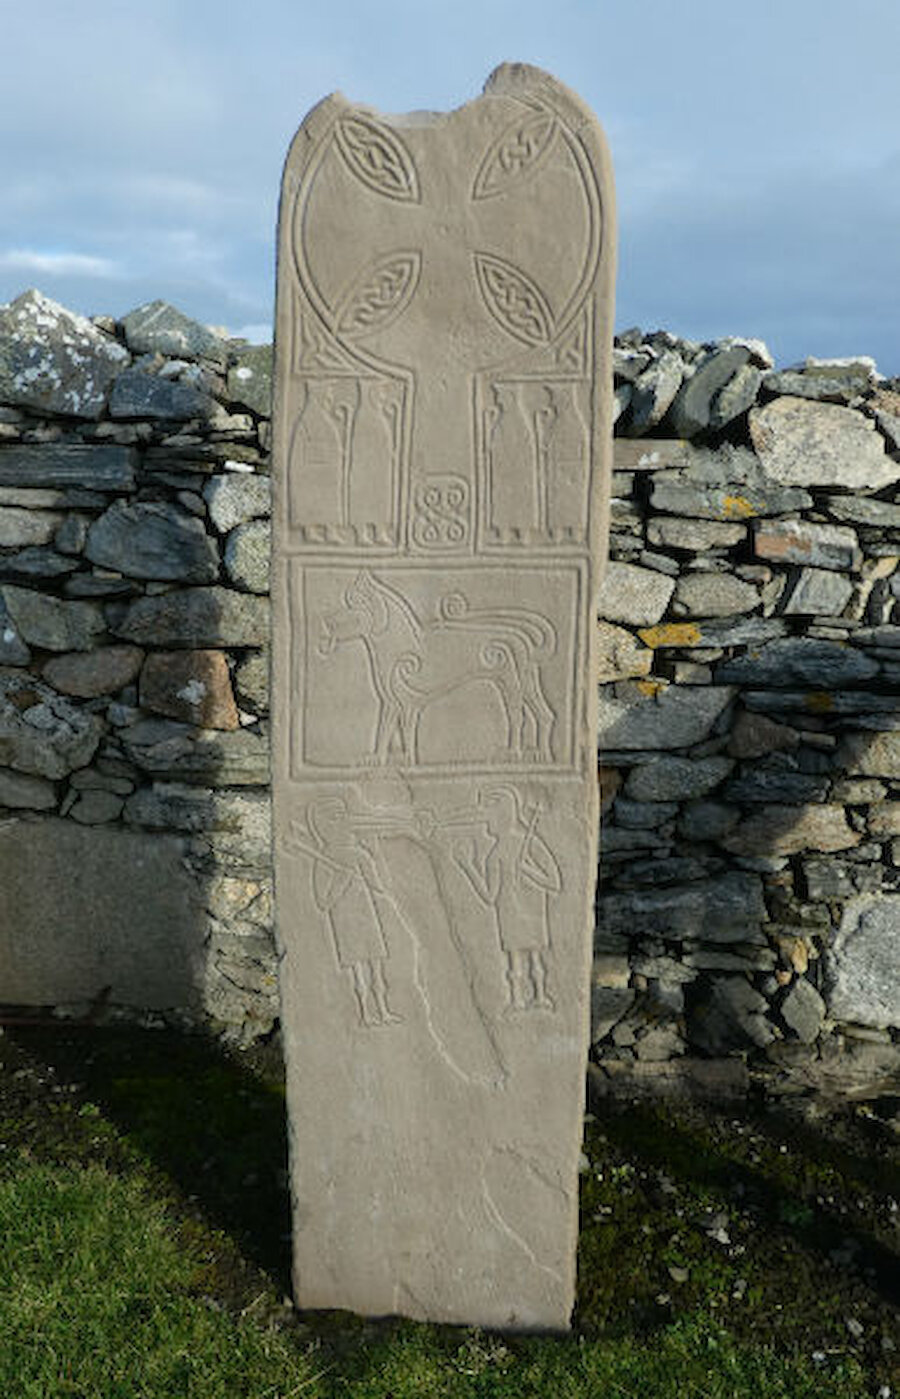 The replica of the carved stone found at Papil (Courtesy Alastair Hamilton)